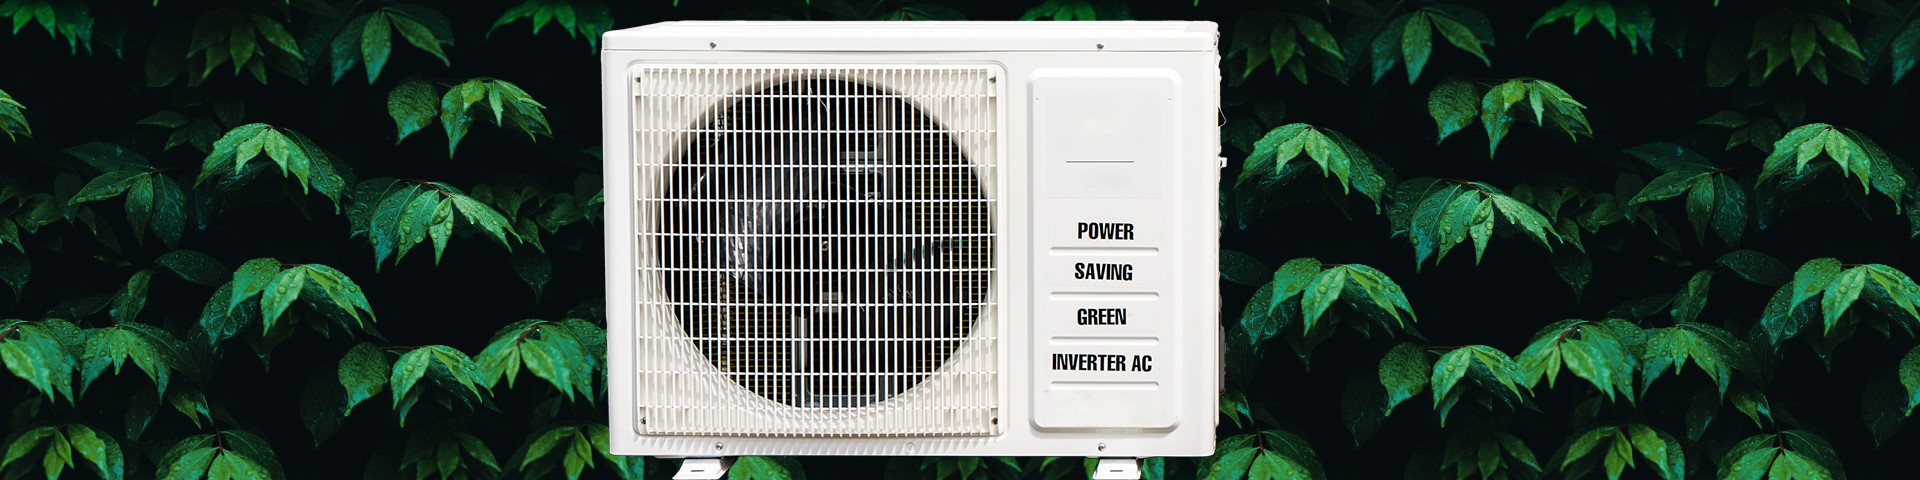 An air conditioner positioned in front of green leaves.